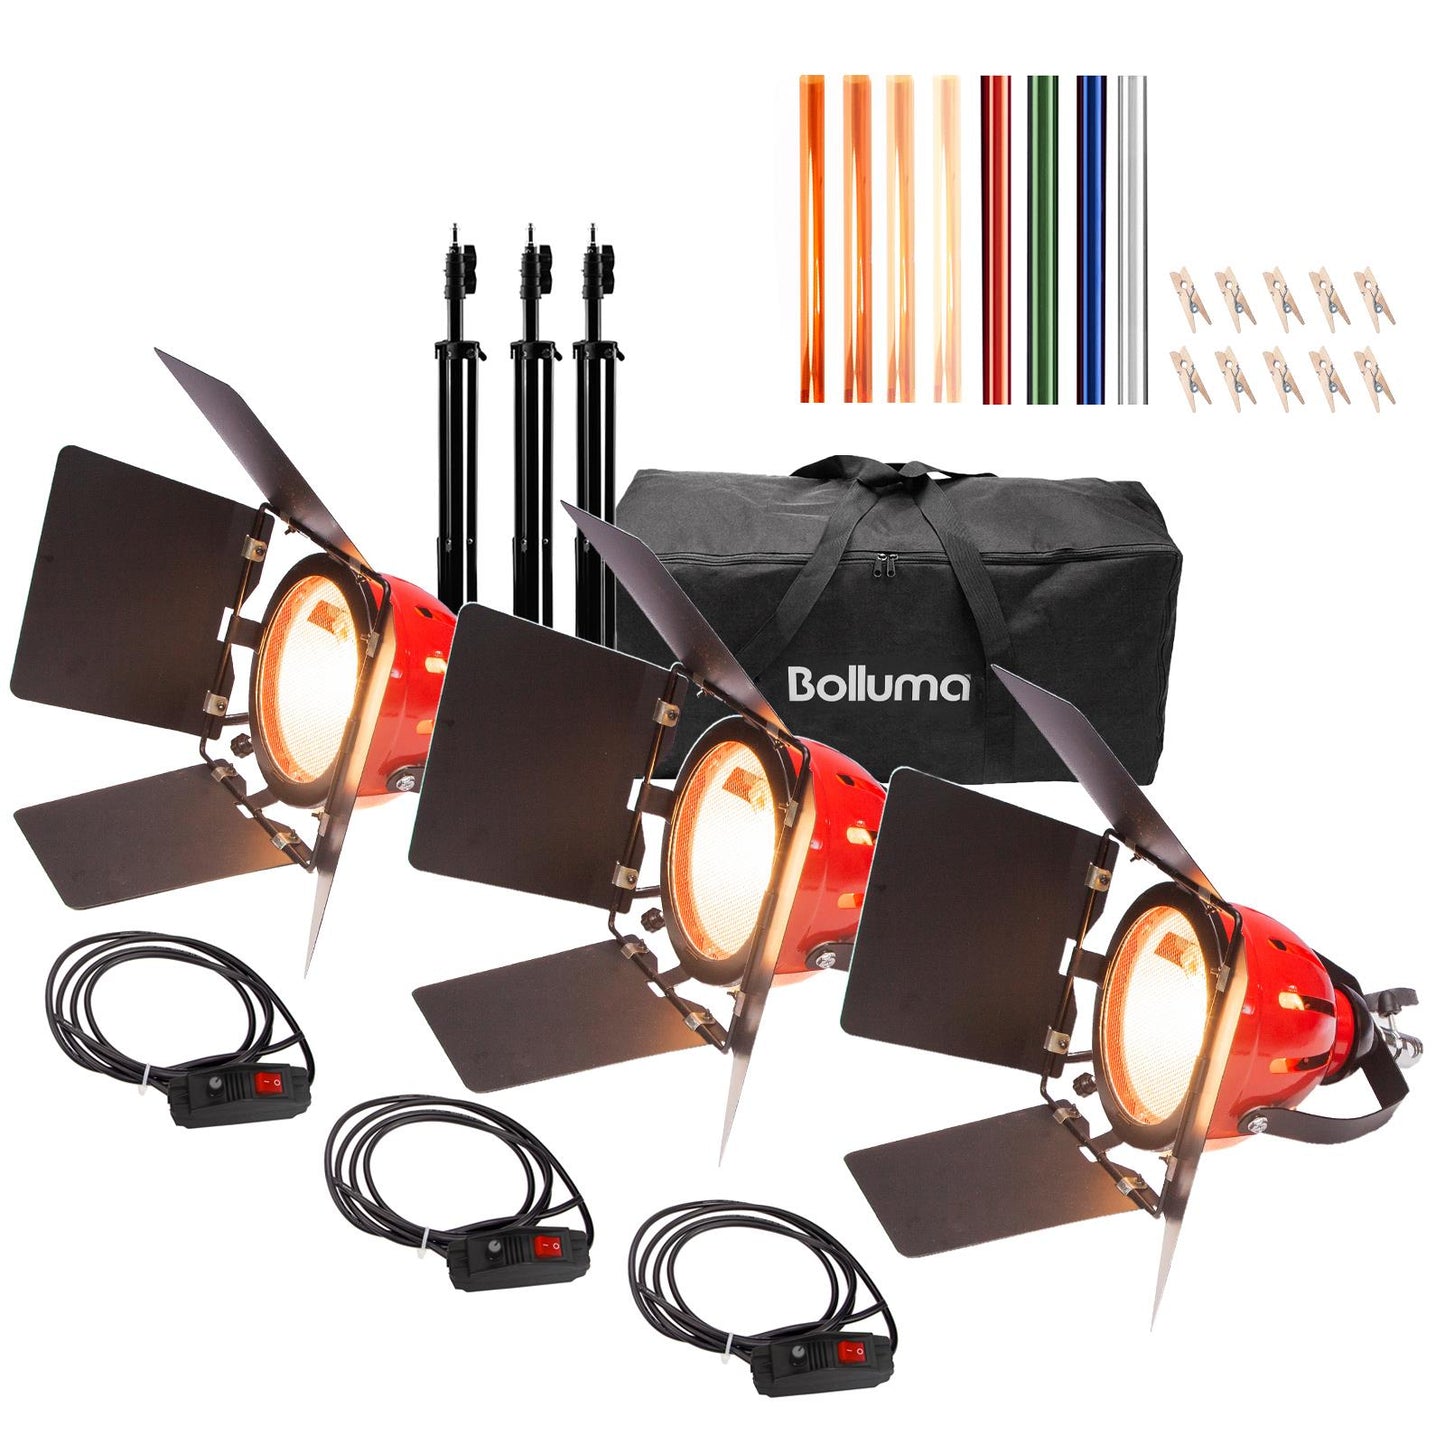 Video Continuous Lighting Kit Dimmable - 3x 800W Tungsten Redhead Spotlight, 2x 200cm Light Stand, 8x CTO CTB Lighting Gel Filters with Clips, 1x Carry bag, for Photography Photo Filming Shooting